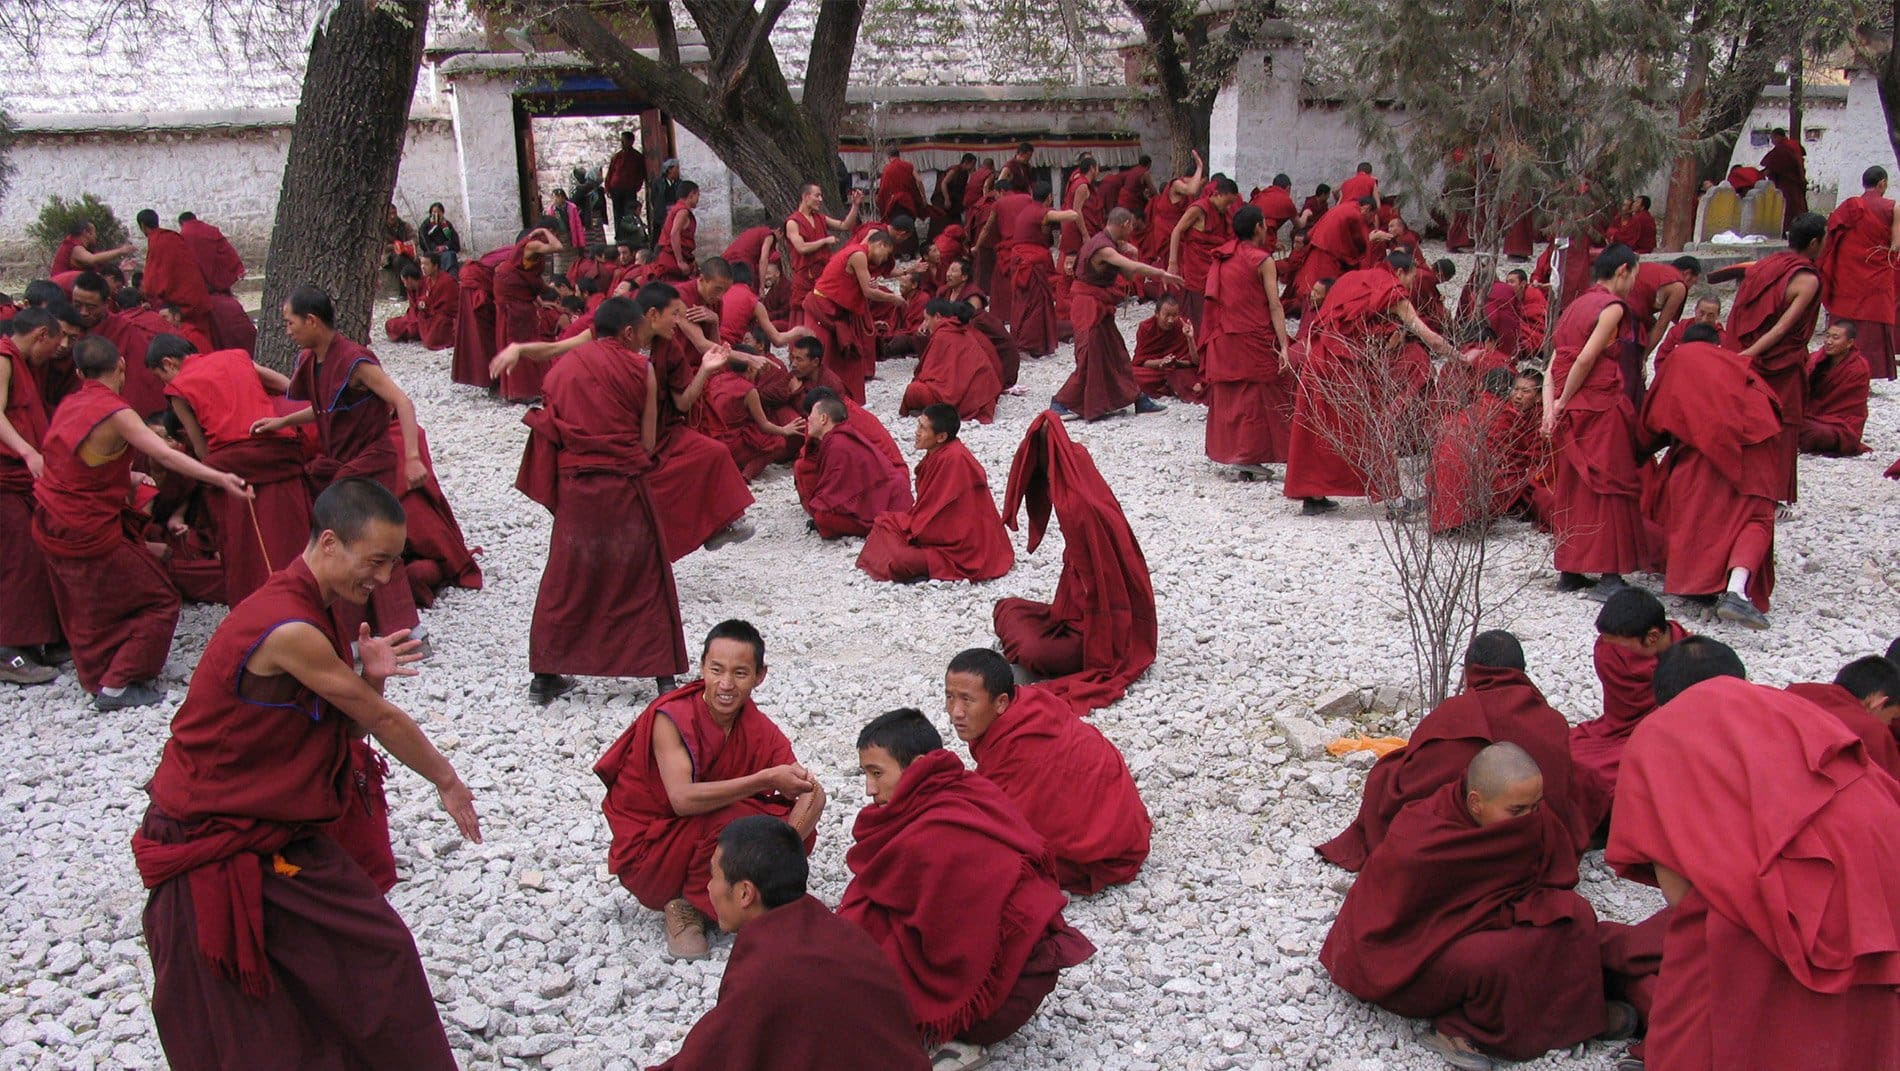 Monastic Debate~Young Buddhist monks of the Gelug sect have developed unusual techniques to practice their debating skills.